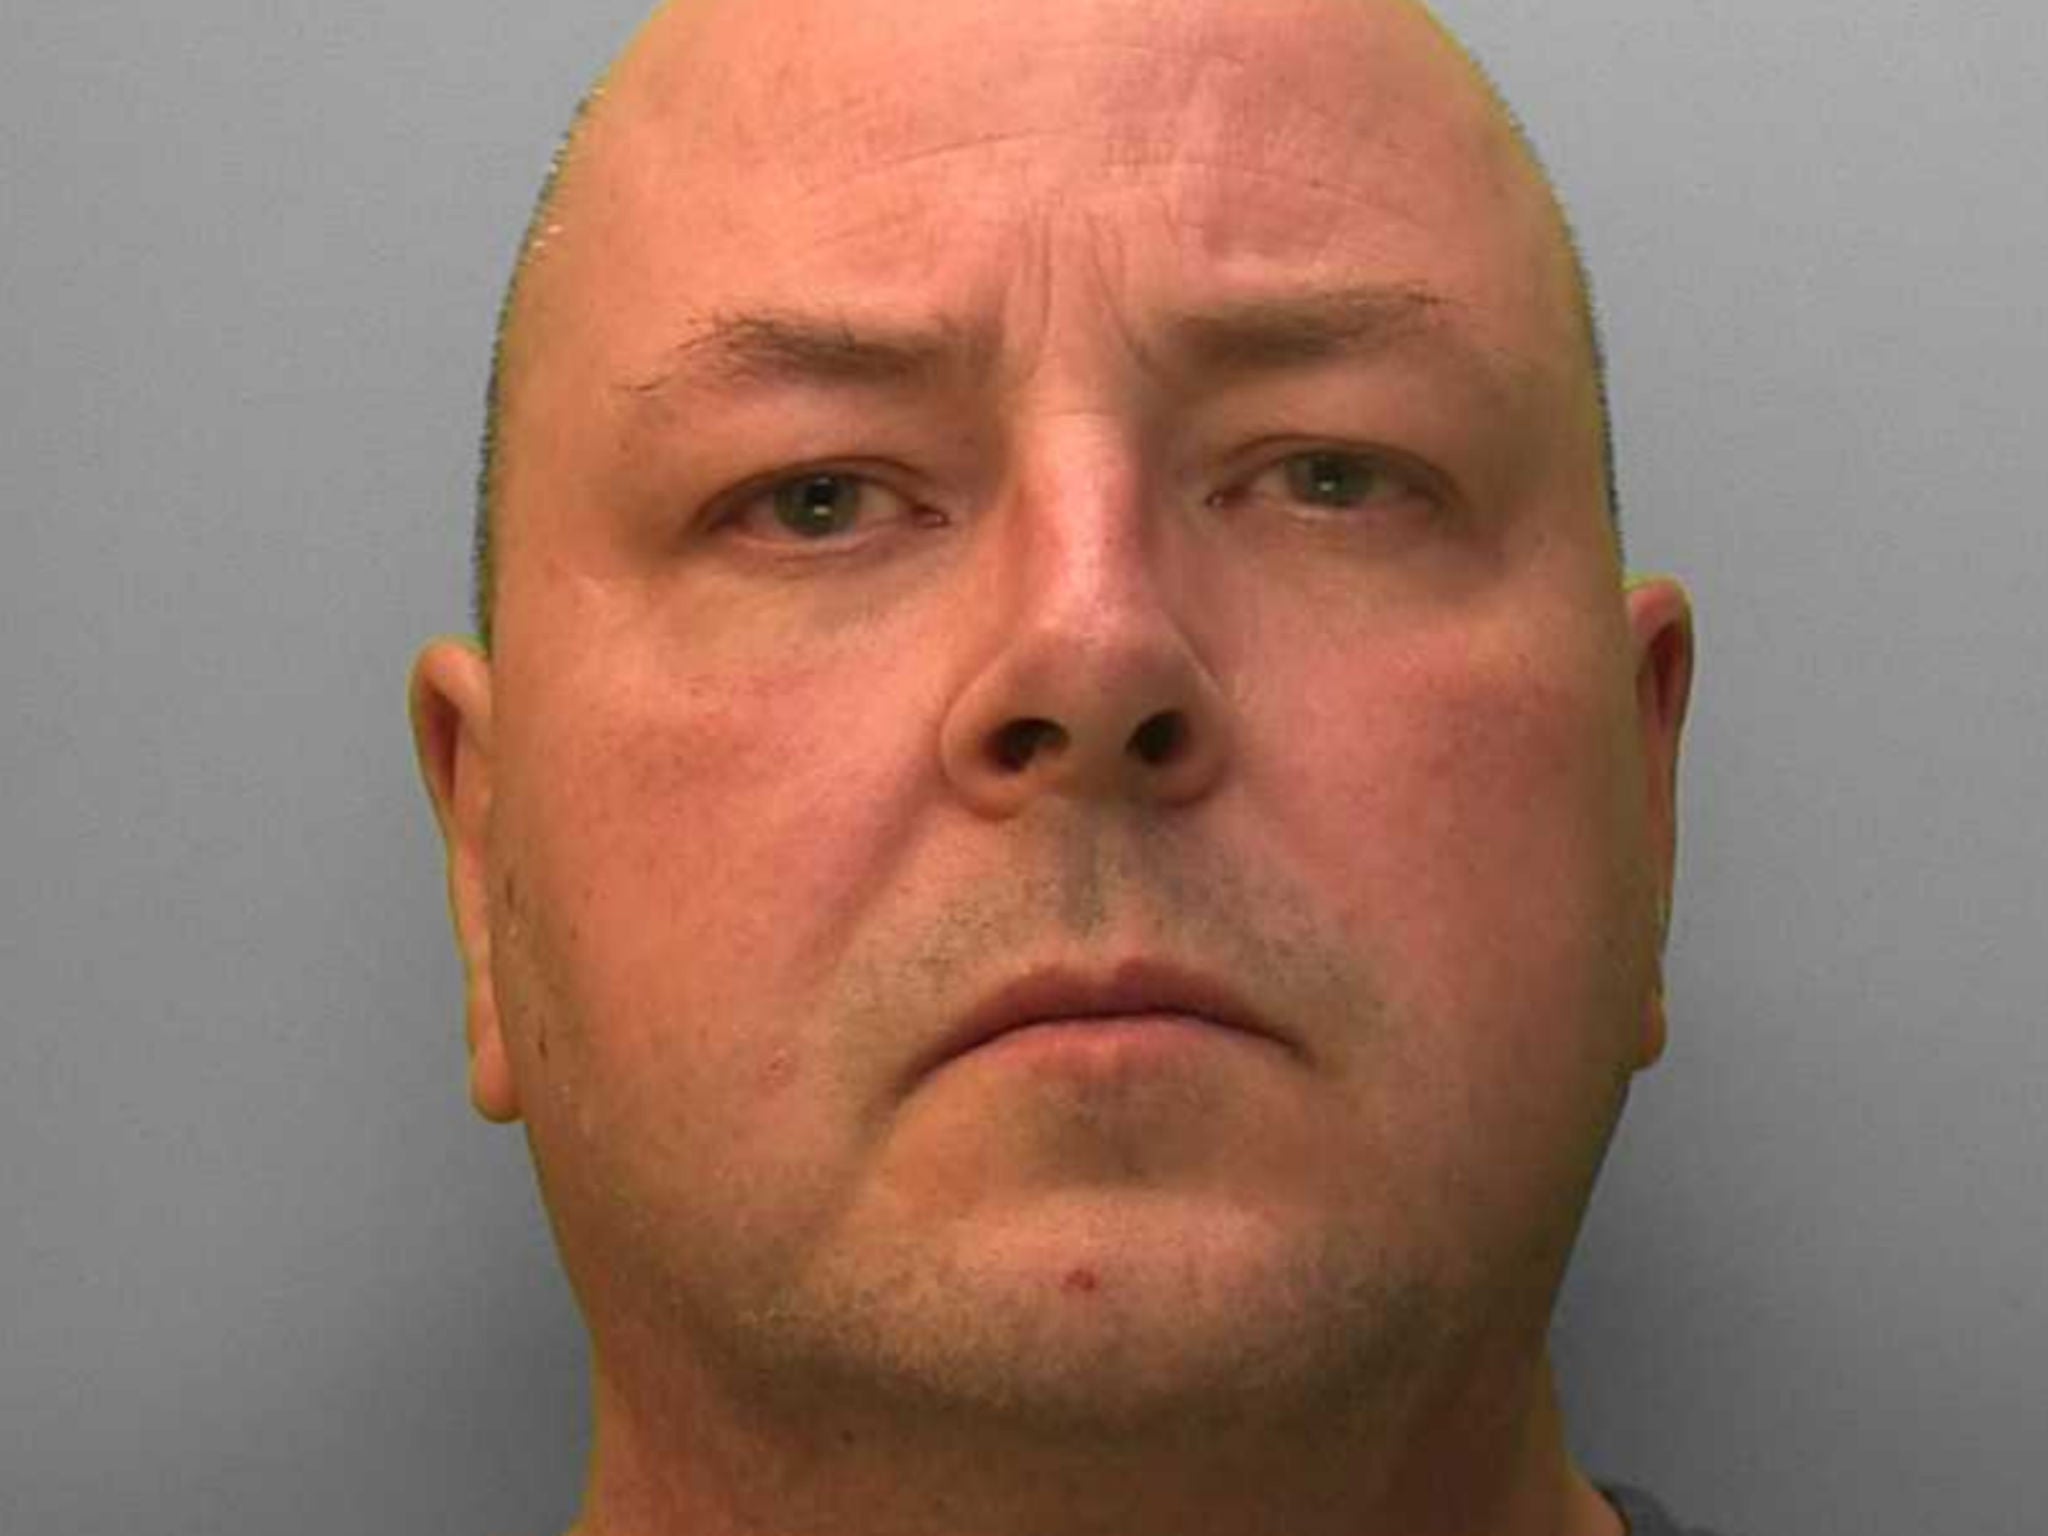 Glenn Jones, 56, was caught by police at a shopping centre after arranging to meet his target there